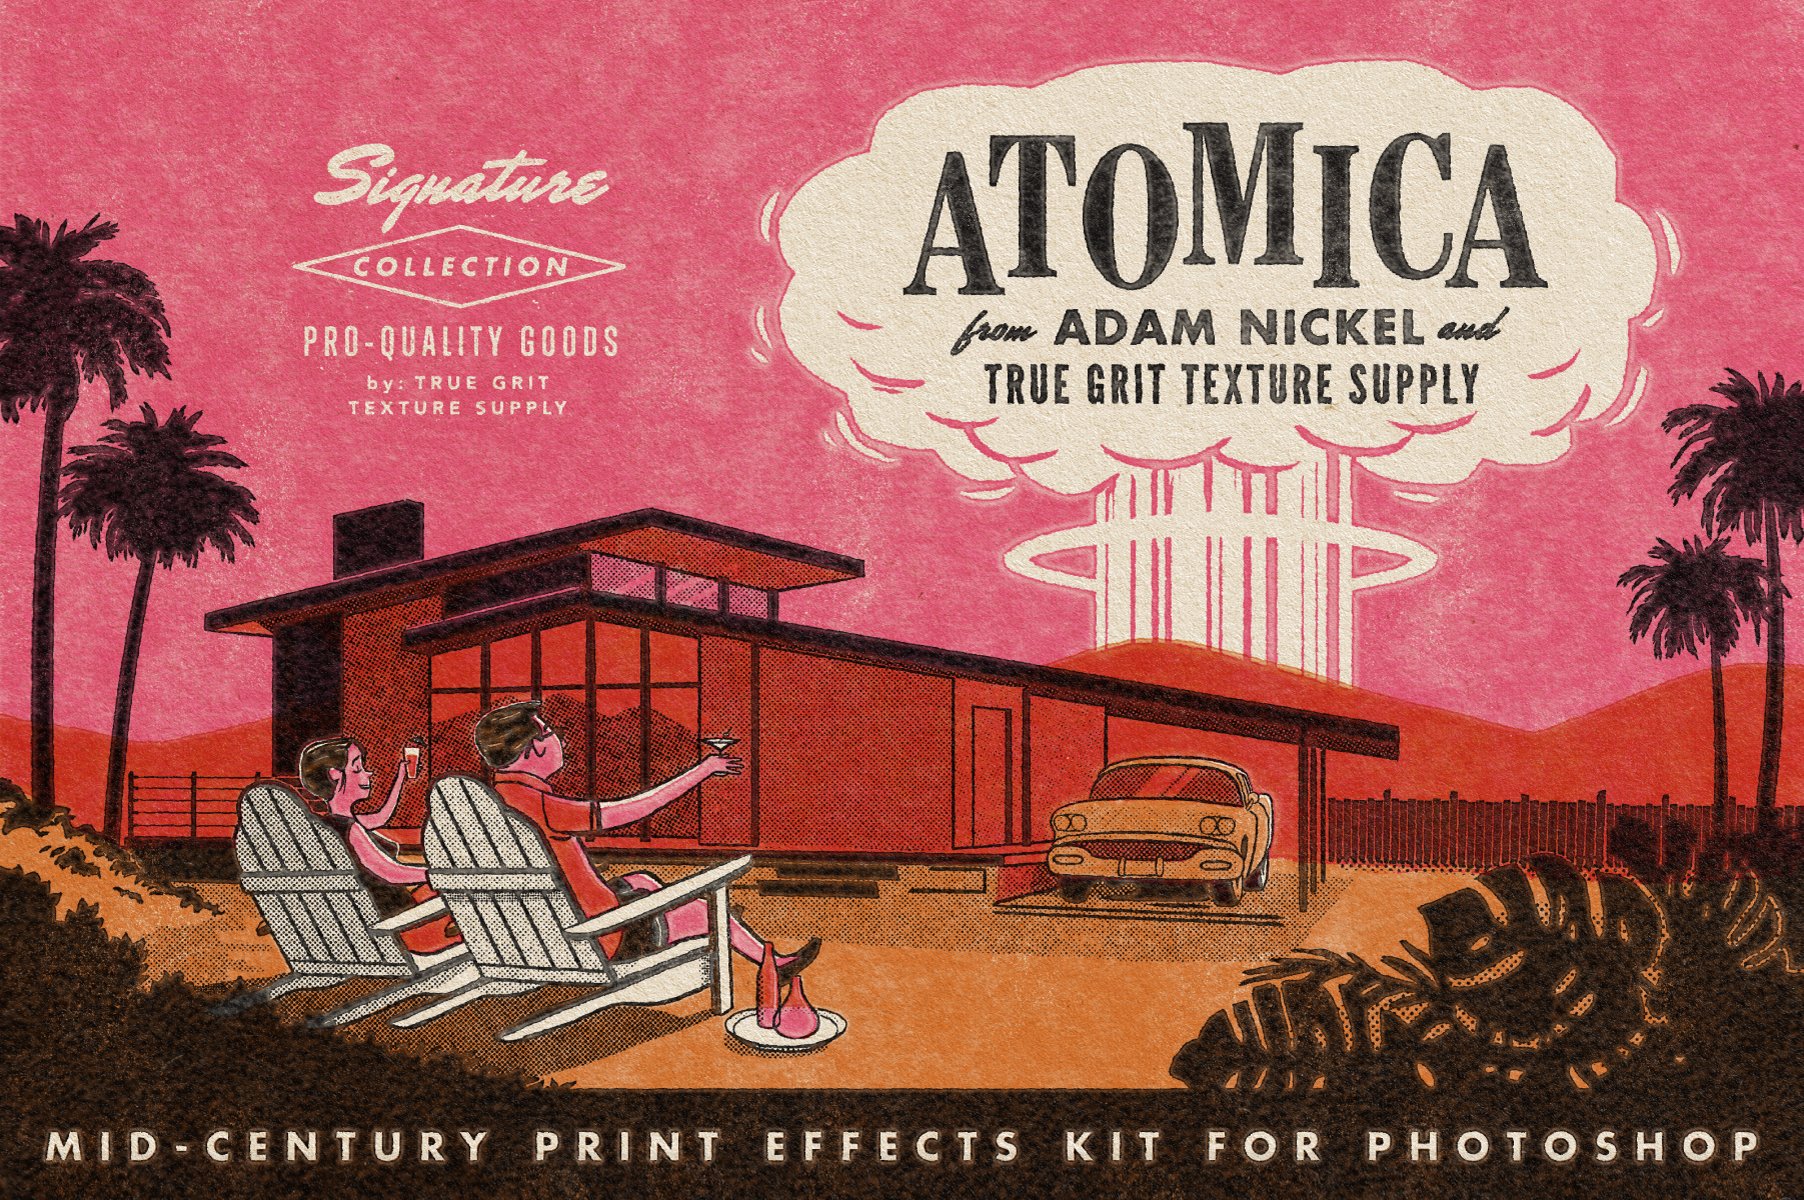 Atomica Mid-Century Print Effectscover image.